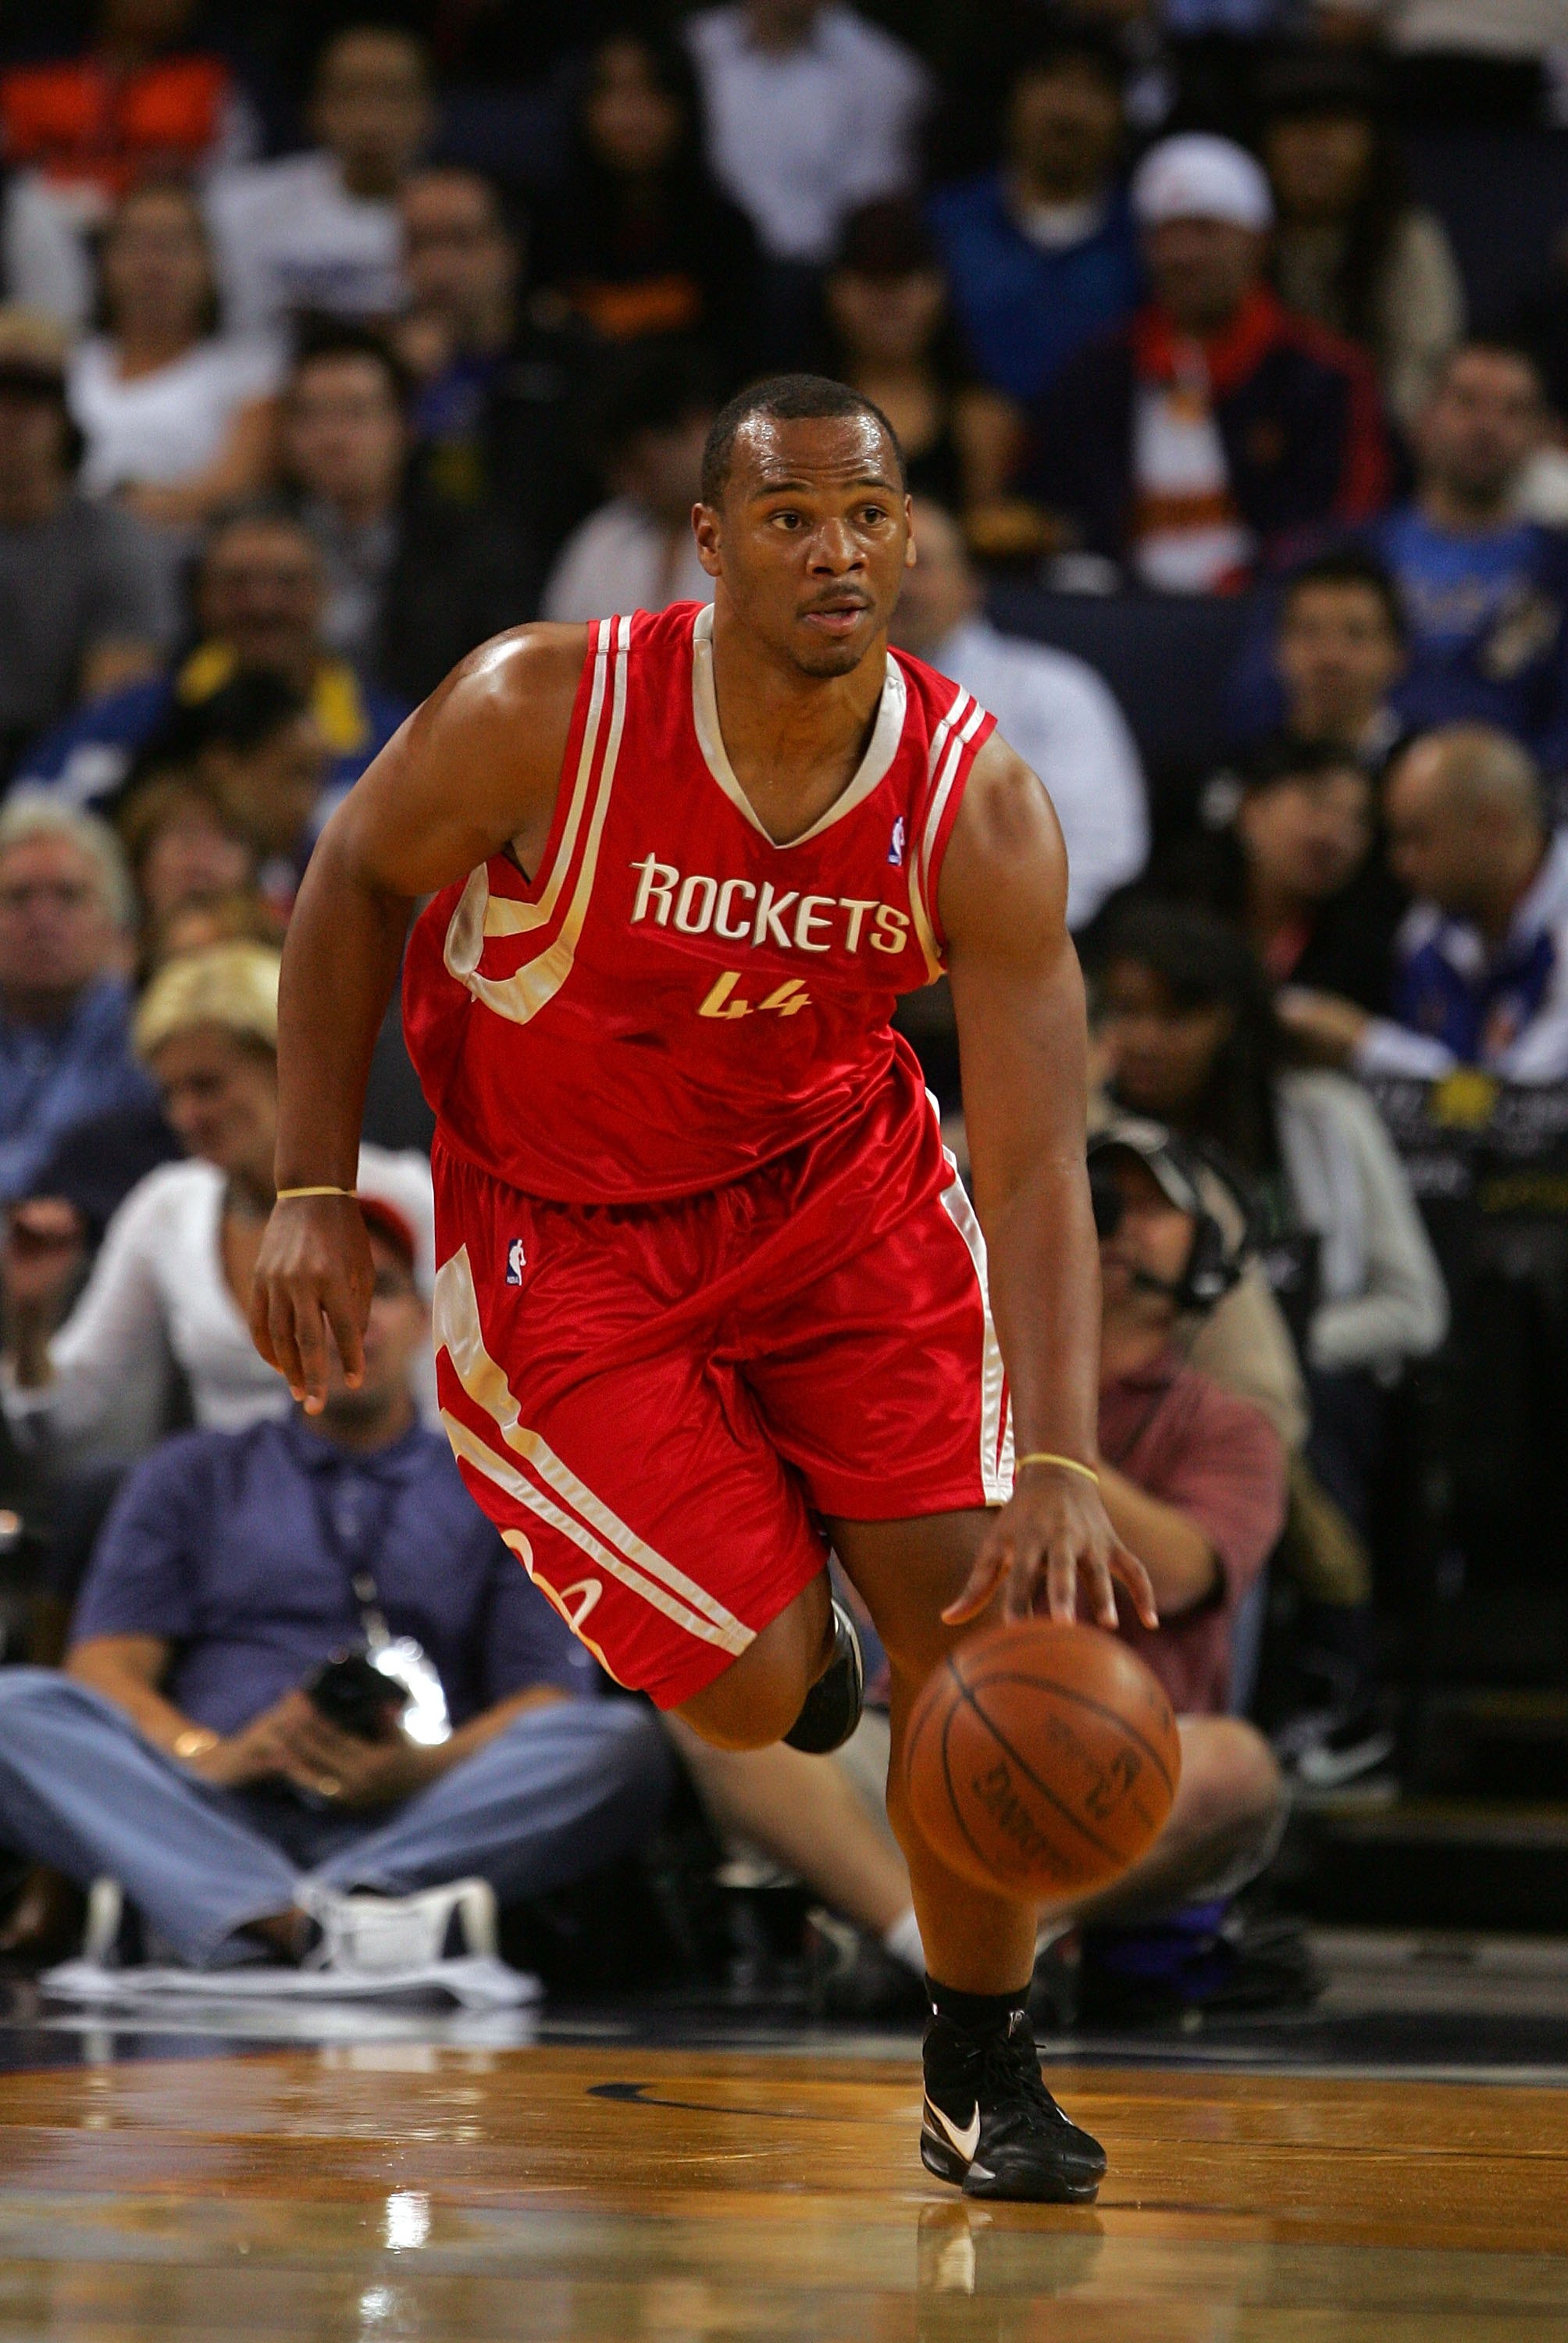 OAKLAND, CA - OCTOBER 28:  Chuck Hayes #44 of the Houston Rockets dribbles the ball during their game against the Golden State Warriors at Oracle Arena on October 28, 2009 in Oakland, California.  (Photo by Ezra Shaw/Getty Images)